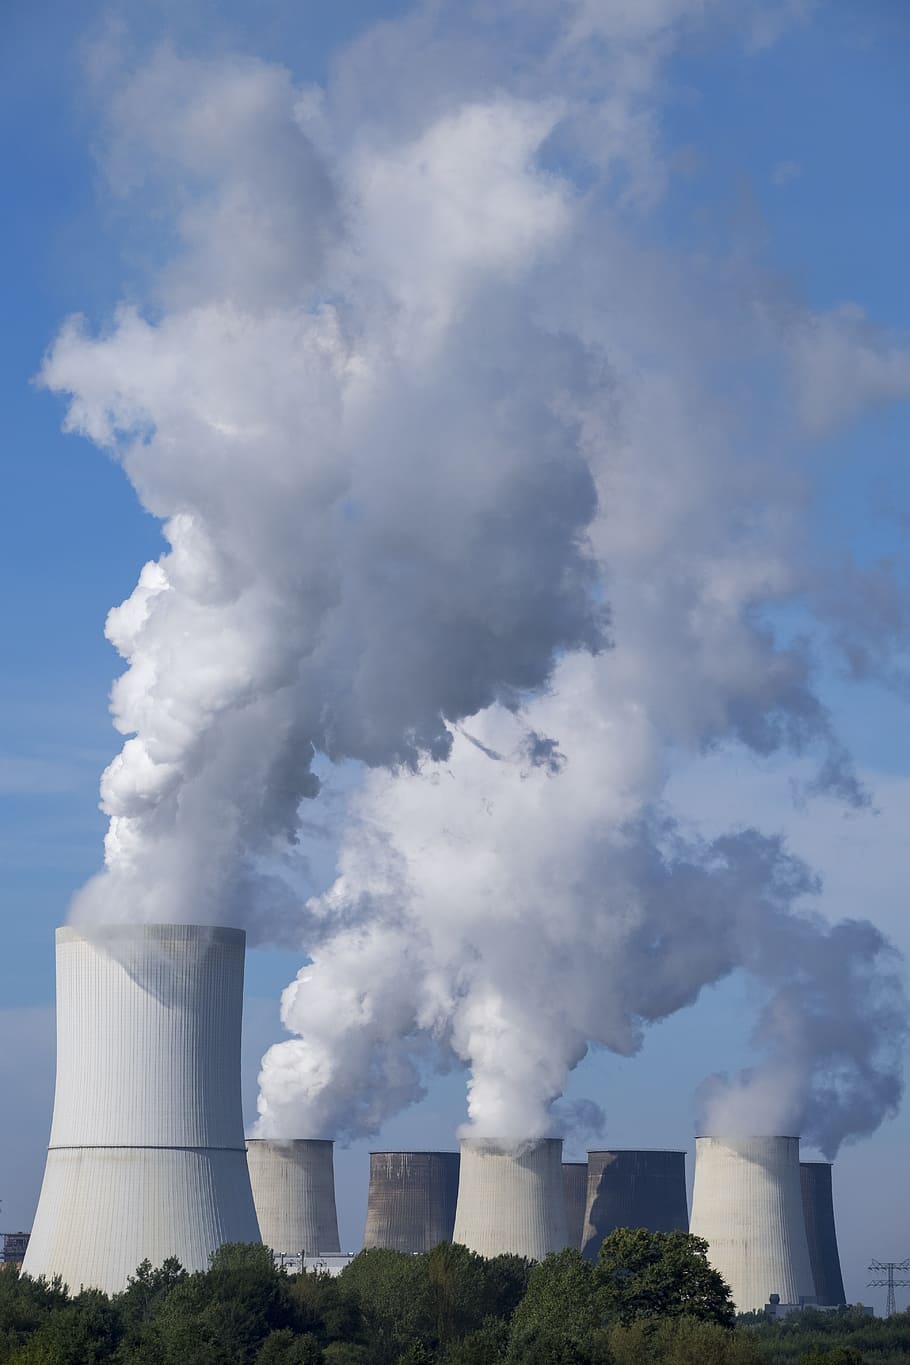 white, smoke, coming, power plant, industry, nuclear power plant, chimney, industrial plant, pollution, environmental protection